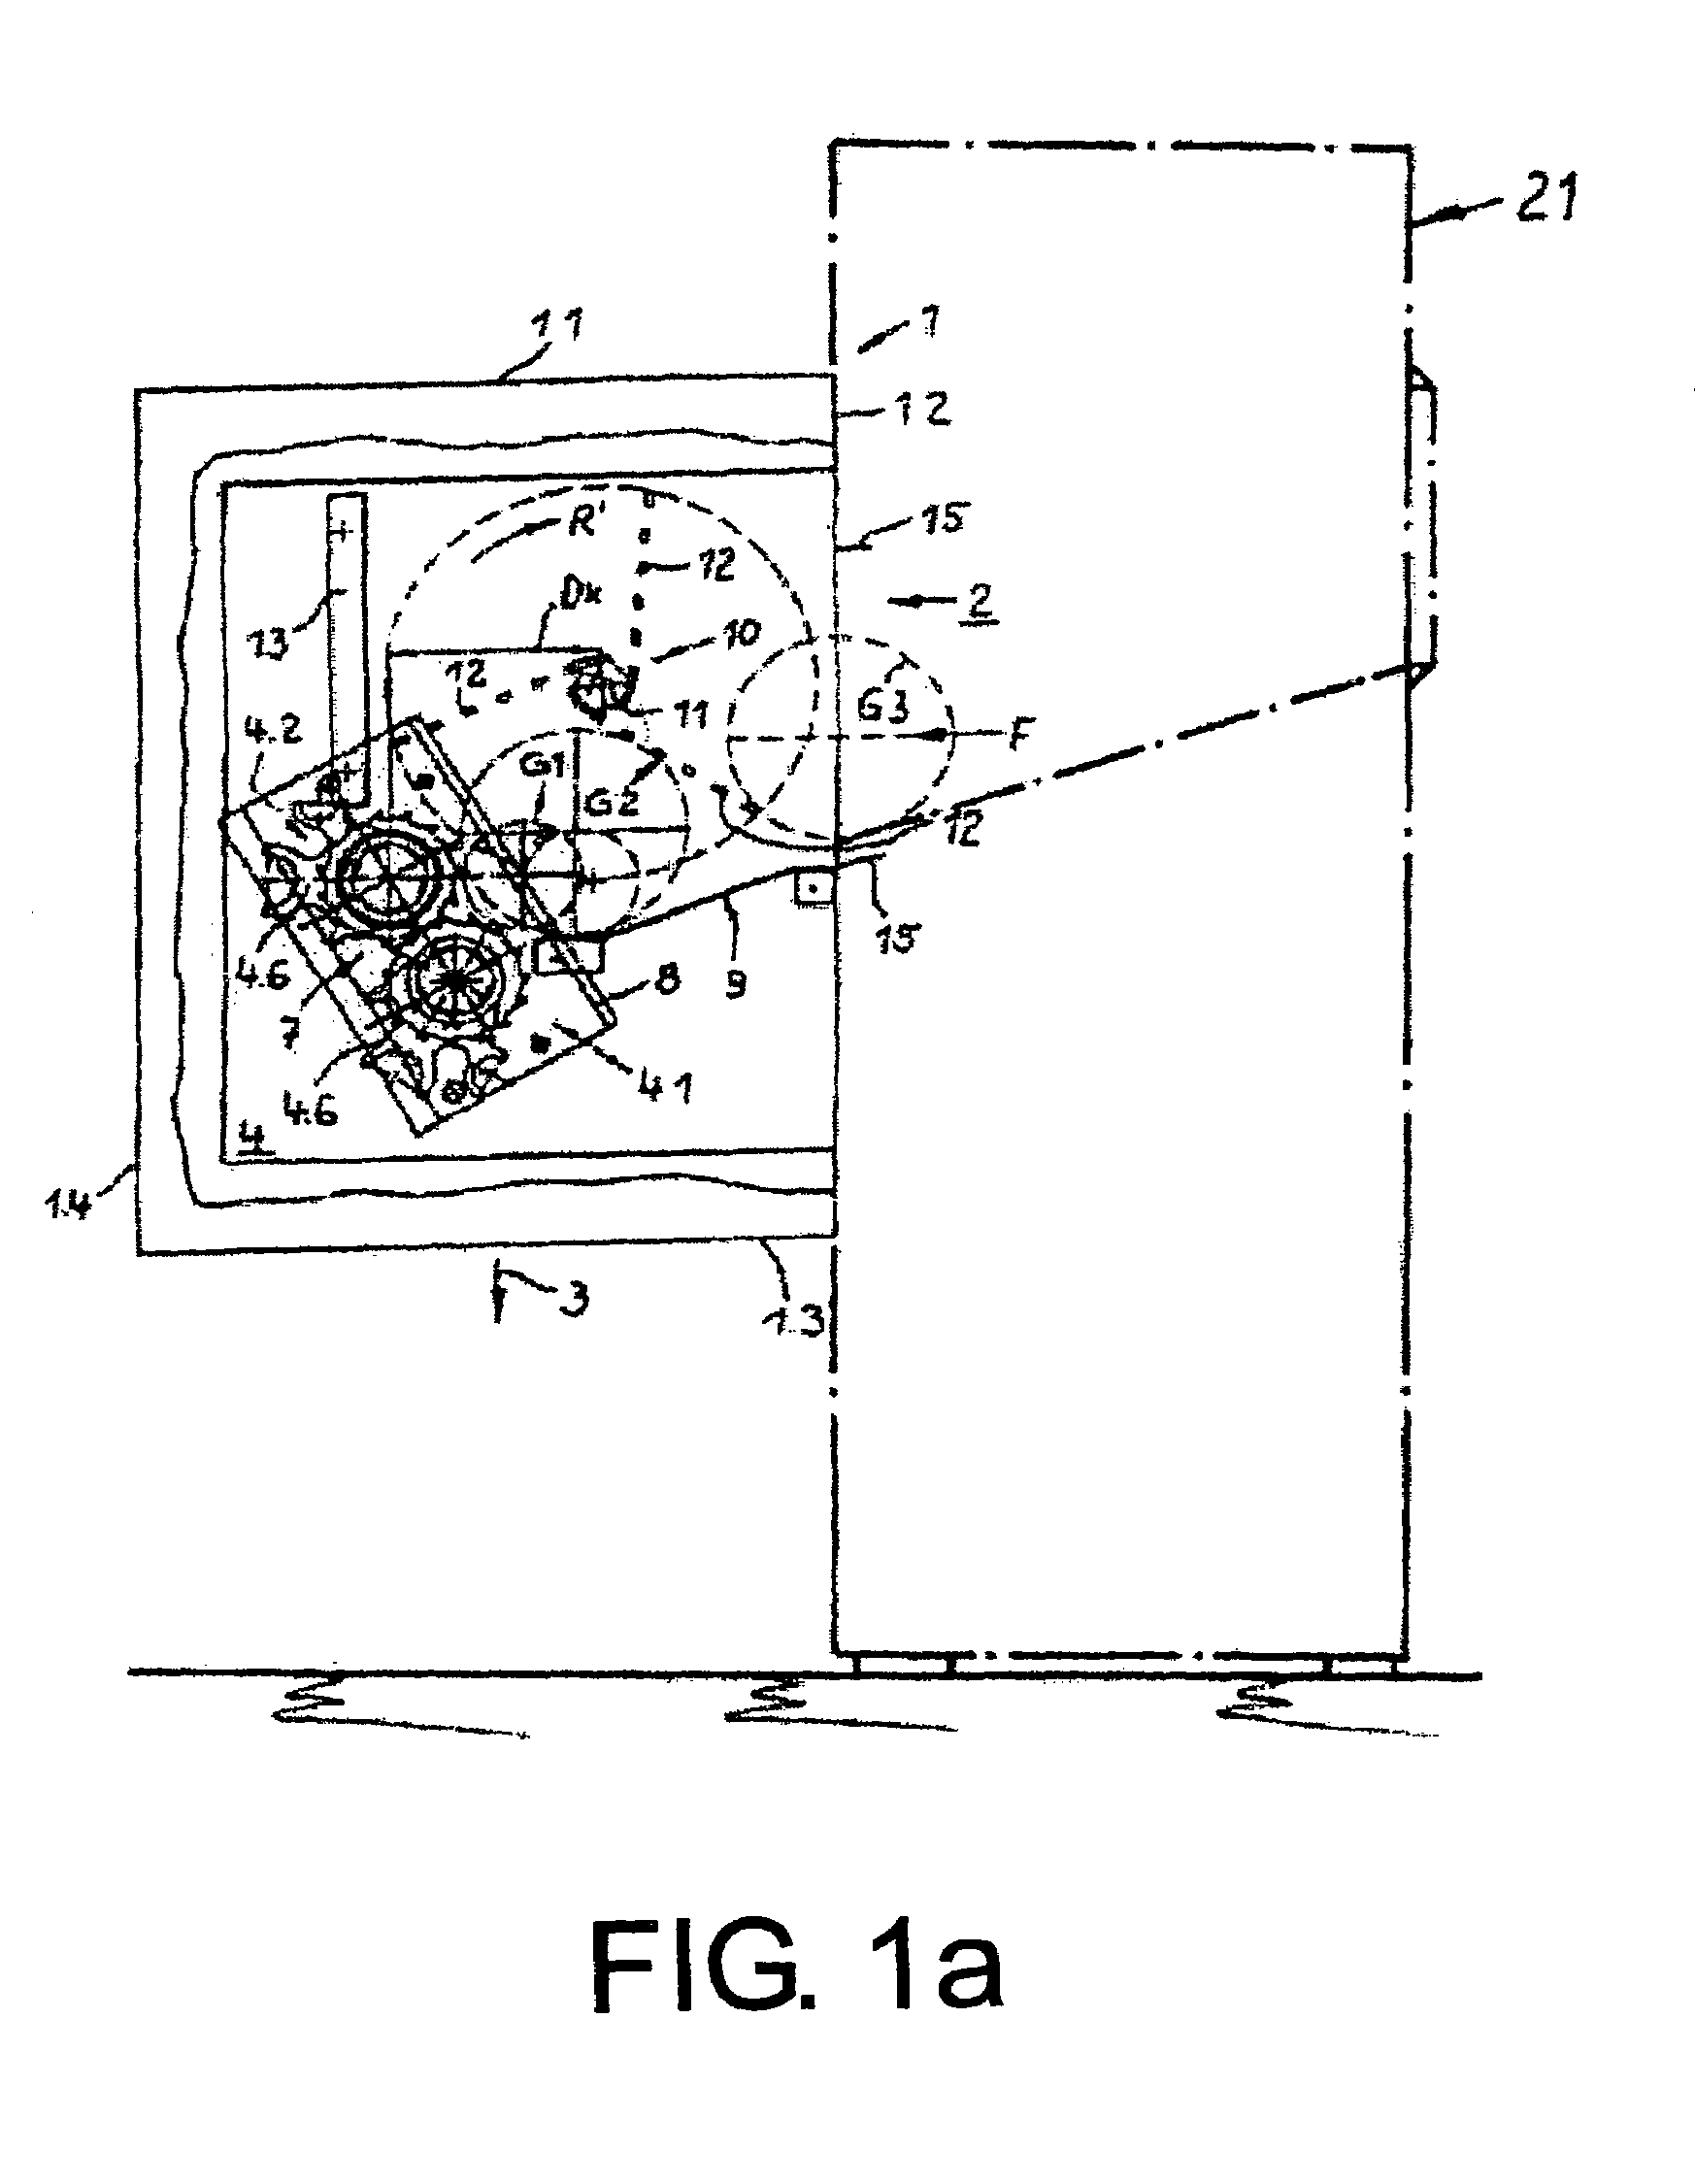 Device for pressing empty containers together and method therefor